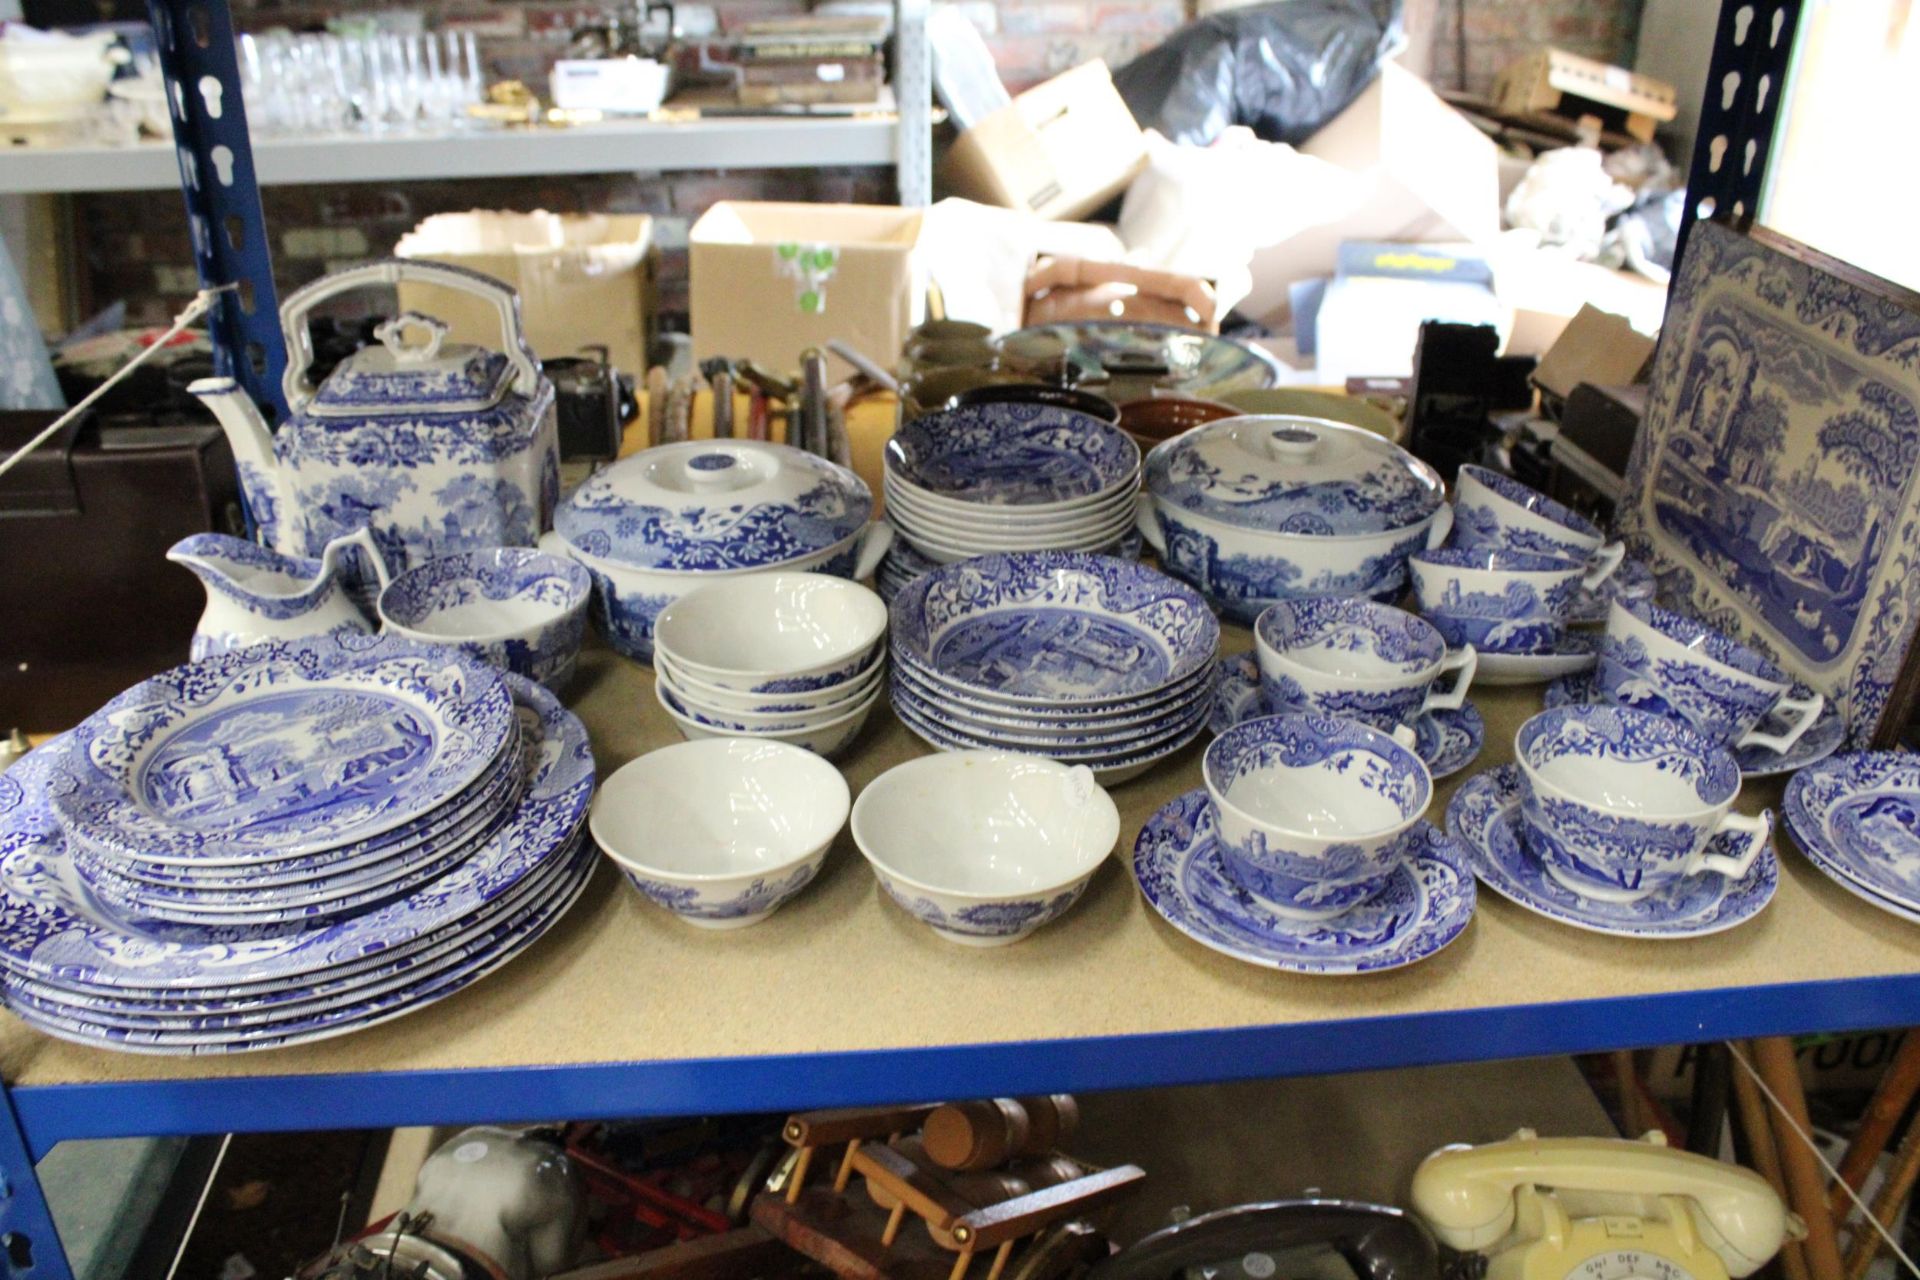 A LARGE COLLECTION OF SPODE BLUE ITALIAN WARE TO INCLUDE LIDDED BOWLS, KETTLE, SUGAR BOWL AND